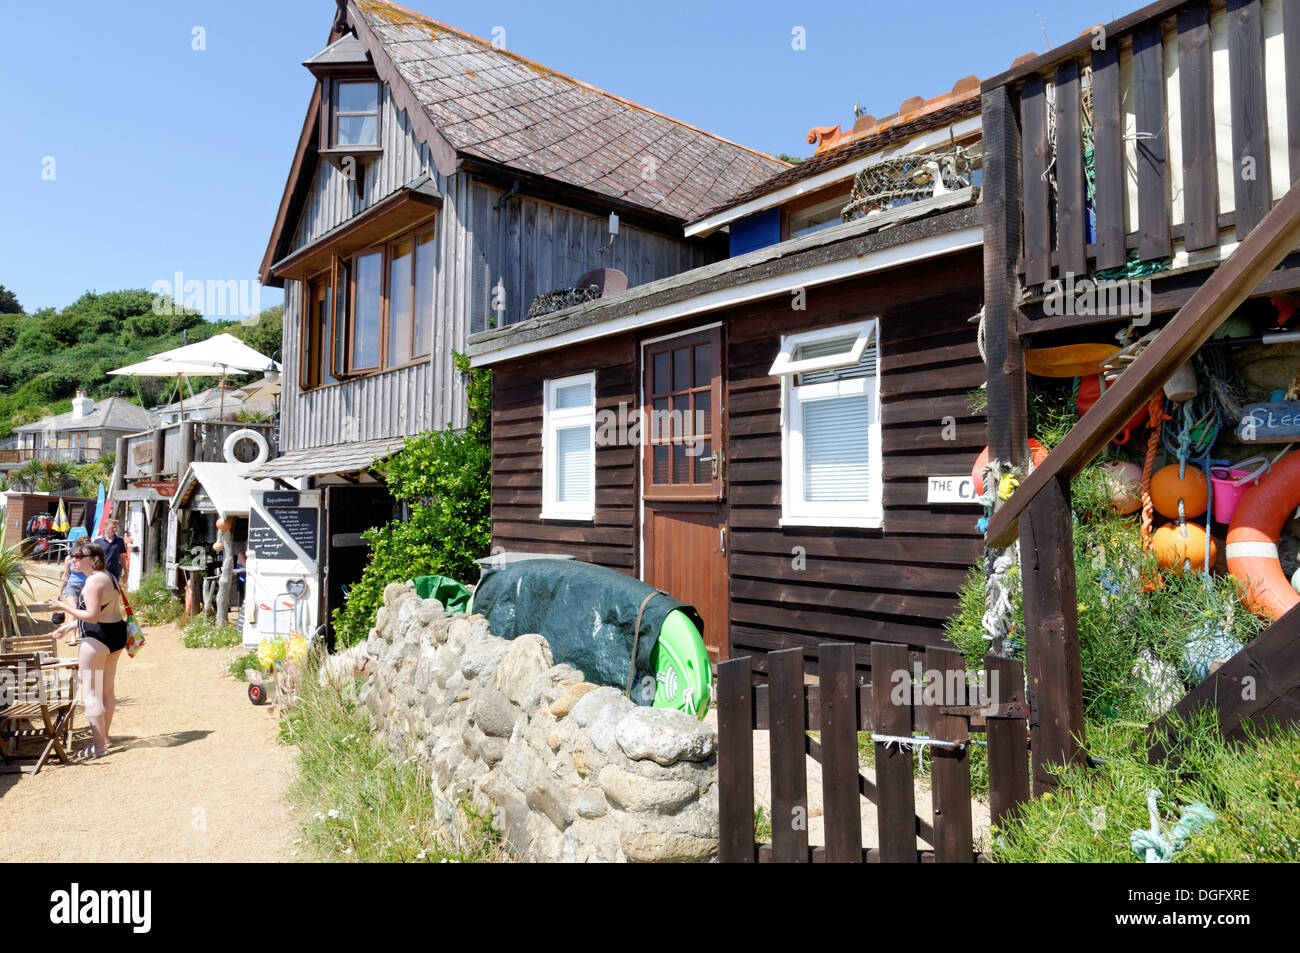 Beach Houses,  Steephill Cove,Whitwell, Ventnor, Isle of Wight, England, UK. Stock Photo